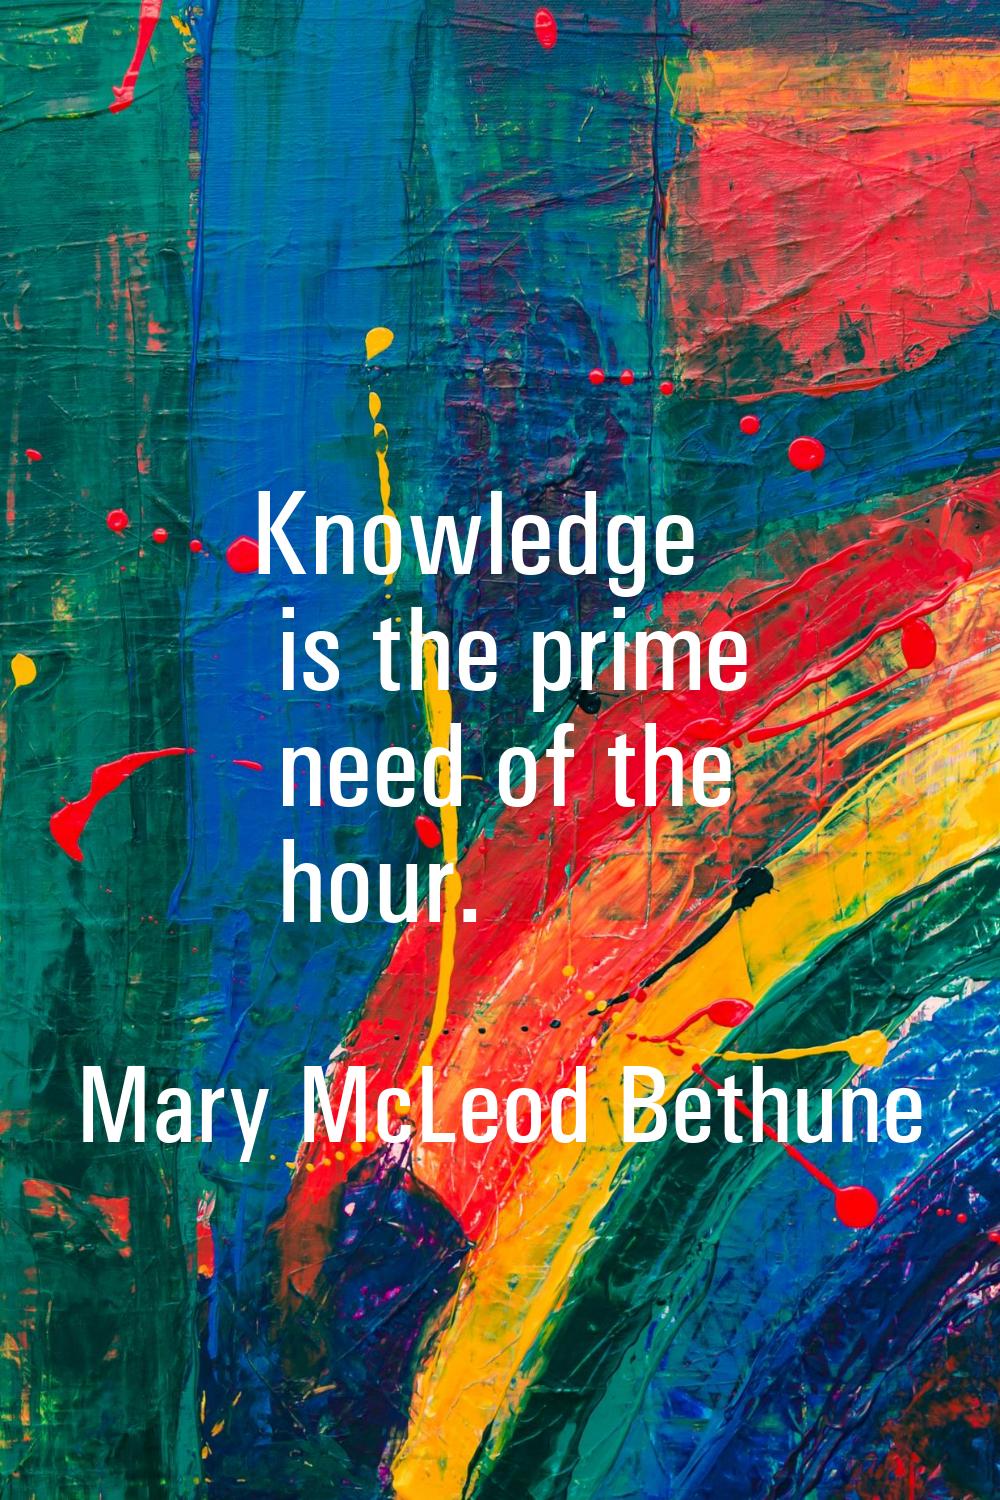 Knowledge is the prime need of the hour.